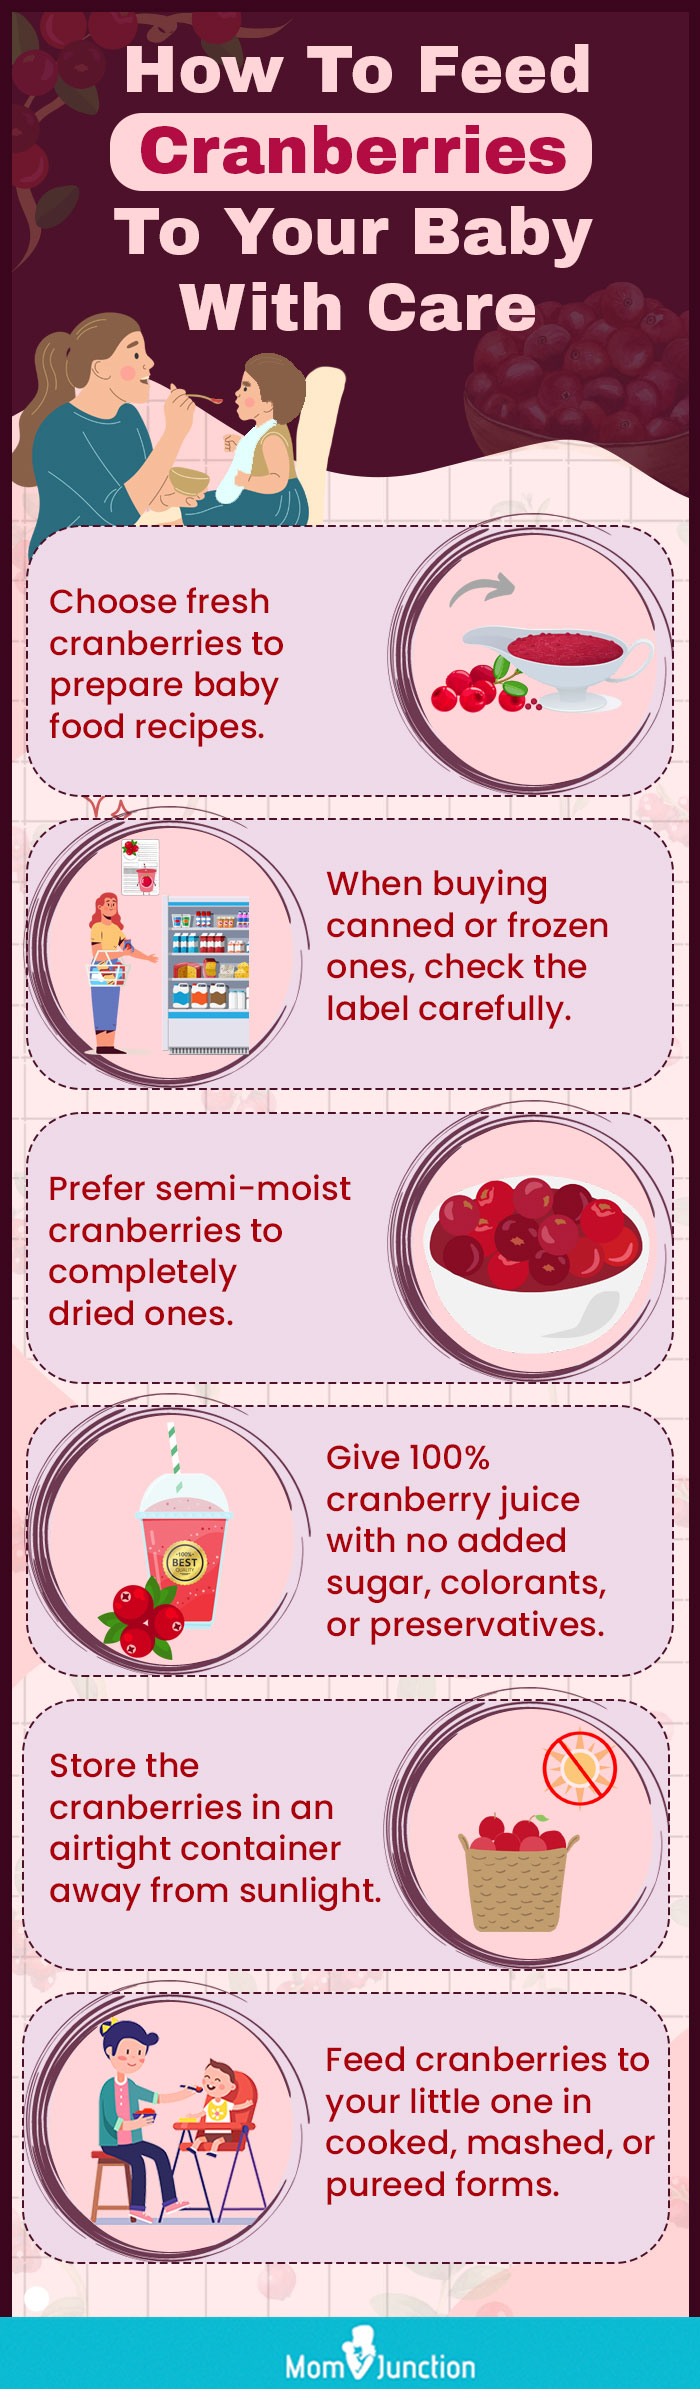 how to feed cranberries to your baby with care (infographic)